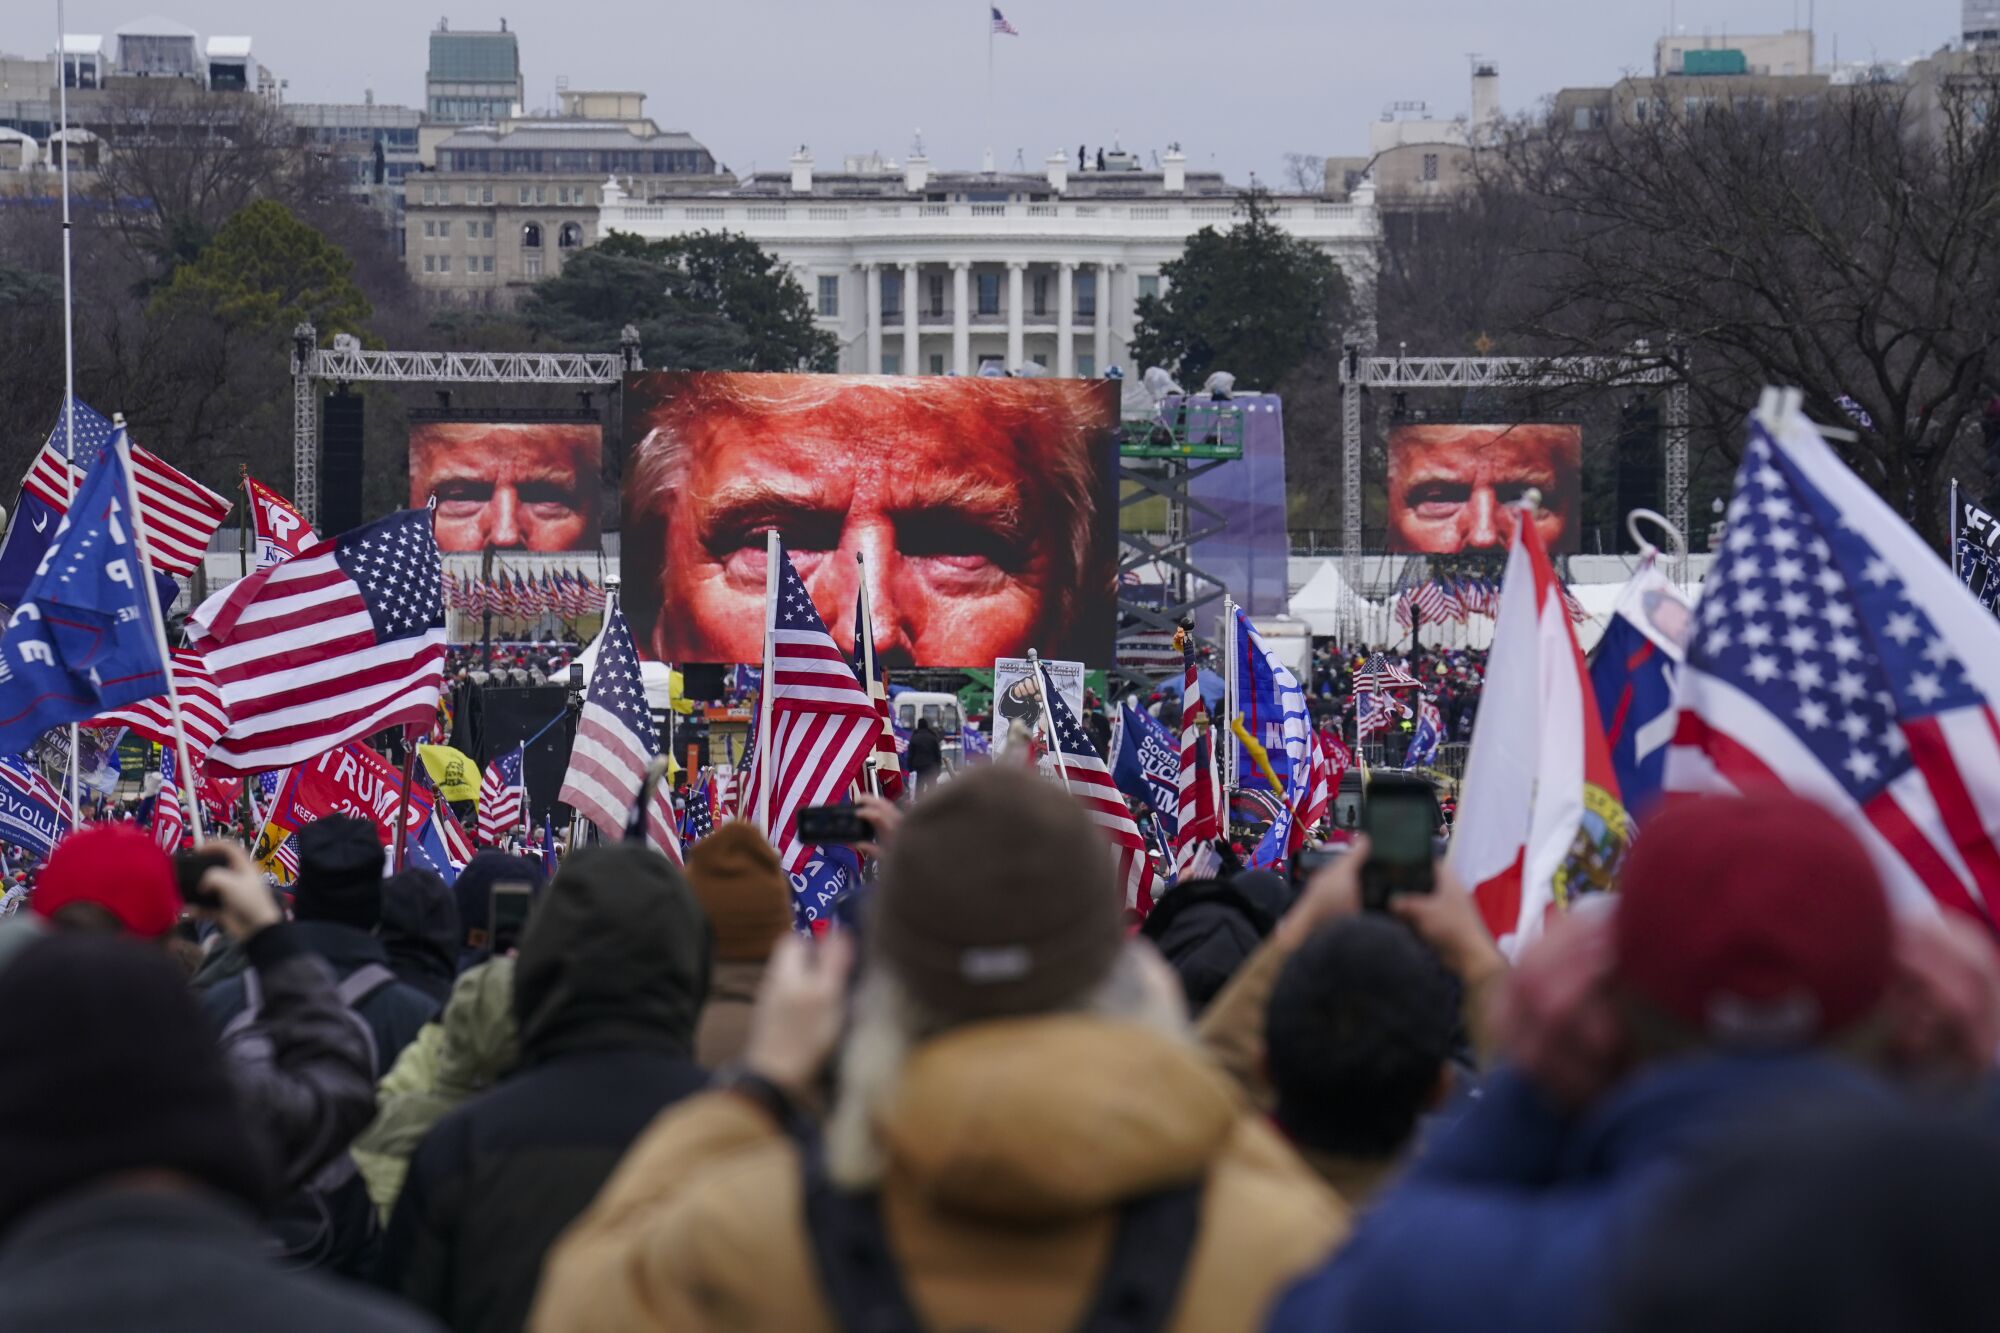 Trump supporters participate in a rally in Washington